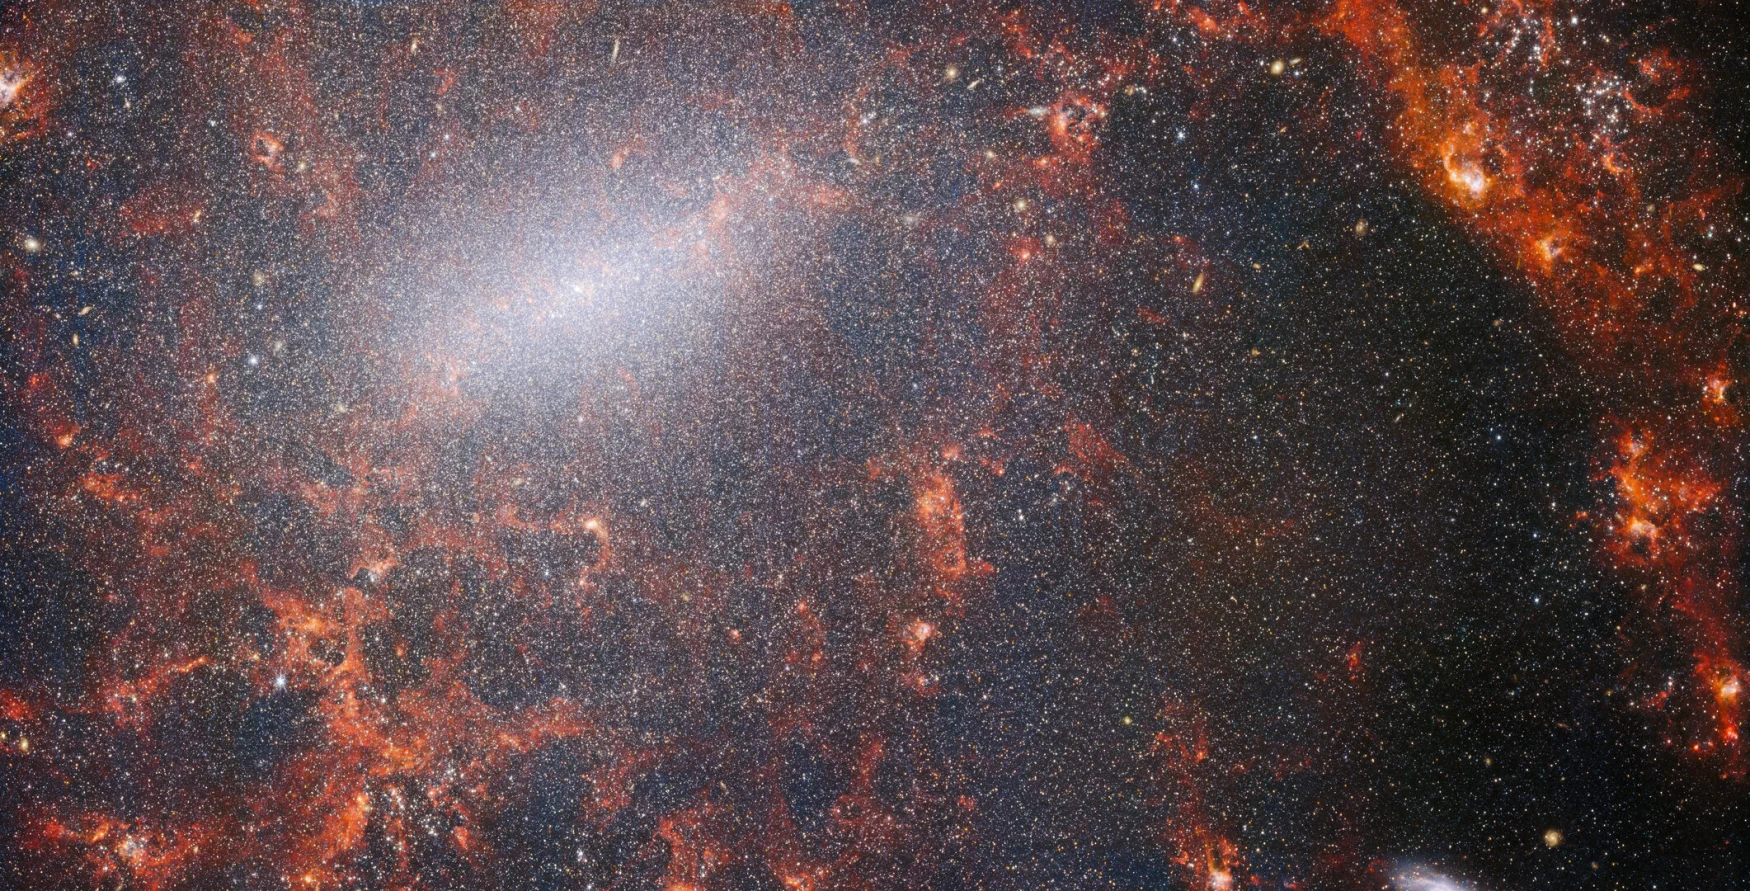 Fine filaments of dust and bright star clusters are seen across this image from the NASA/ESA/CSA James Webb Space Telescope.  This view from Webbâ€™s NIRCam instrument is studded with the galaxy's massive cluster of stars, the most densely packed along its bright central bar, along with blazing red clouds of gas illuminated by the young stars within.  These twinkling stars belong to the barrier spiral galaxy NGC 5068, which lies about 17 million light-years from Earth in the constellation Virgo.  This image of NGC 5068 is part of a campaign to create an astronomy treasure trove, a repository for observations of star formation in nearby galaxies.  Previous gems from this collection can be seen here and here.  These observations are particularly valuable to astronomers for two reasons.  The first is that star formation underpins many areas in astronomy, from the physics of weak interstellar plasmas to the evolution of entire galaxies.  By observing star formation in nearby galaxies, astronomers hope to start a major scientific advance with some of the first data available from Webb.  The second reason is that Webb's observations are based on other studies using telescopes including the NASA/ESA Hubble Space Telescope and some of the most capable ground-based observatories in the world.  Webb collected images of 19 nearby star-forming galaxies, which astronomers were then able to combine with Hubble's catalogs of 10,000 star clusters, spectrally mapped 20,000 star emission nebulae from the Very Large Telescope (VLT), and observed 12,000 from dark nebulae.  , dense molecular clouds identified by the Atacama Large Millimeter/Submillimeter Array (ALMA).  These observations span the electromagnetic spectrum and give astronomers an unprecedented opportunity to piece together the details of star formation.  This near-infrared image of the galaxy is filled with the massive cluster of ancient stars that make up the core of NGC 5068. NIRCam's sharp view allows astronomers to peer through the galaxy's gas and dust to examine its stars more closely.  Along the path of the spiral arms are dense, bright clouds of dust: these are H II regions, clusters of hydrogen gas where new stars are forming.  Active, energetic stars ionize the hydrogen around them, which, when combined with emission of hot dust, produces this reddish glow.  H II regions make a great target for astronomers, and Webb's instruments are the perfect tools for examining them, resulting in this image. [Image Description: A close-in image of a spiral galaxy, showing its core and part of a spiral arm. At this distance thousands upon thousands of tiny stars that make up the galaxy can be seen. The stars are most dense in a whitish bar that forms the core, and less dense out from that towards the arm. Bright red gas clouds follow the twist of the galaxy and the spiral arm.] Links NGC 5068 (NIRCam + MIRI Image) 